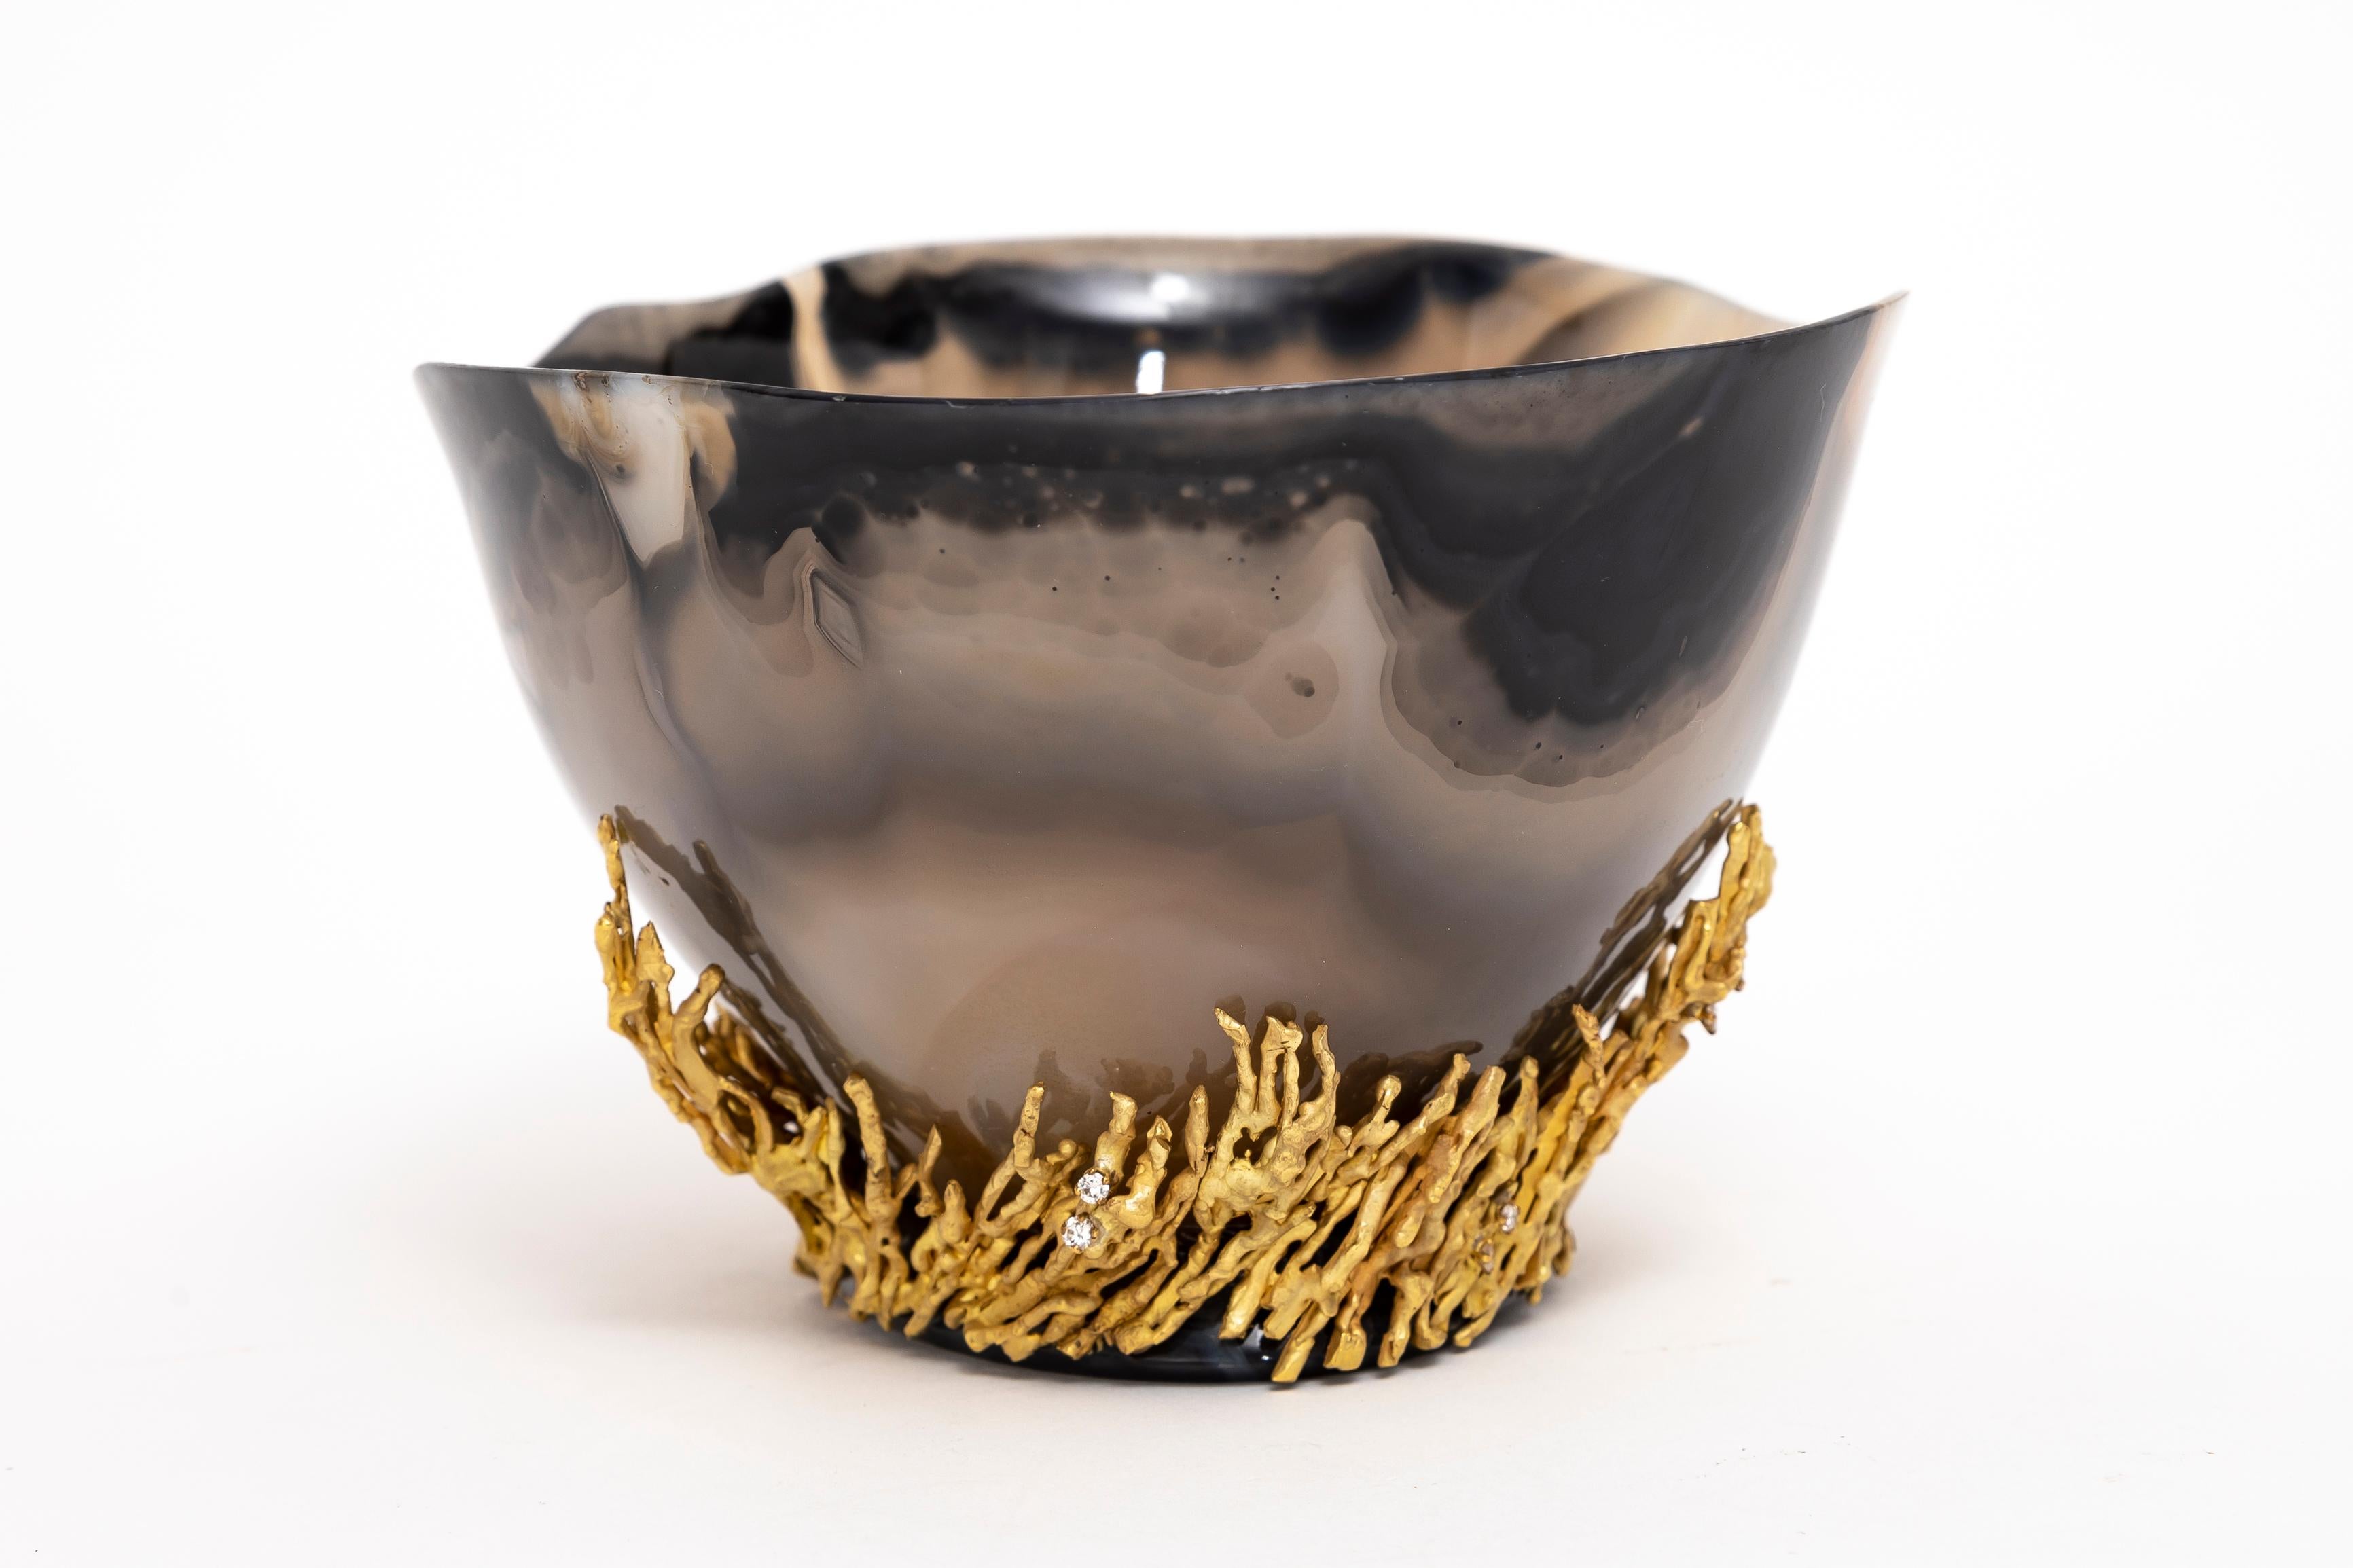 An Incredible Chaumet Paris Gold & Diamond Mounted Carved Agate Bowl For Sale 1